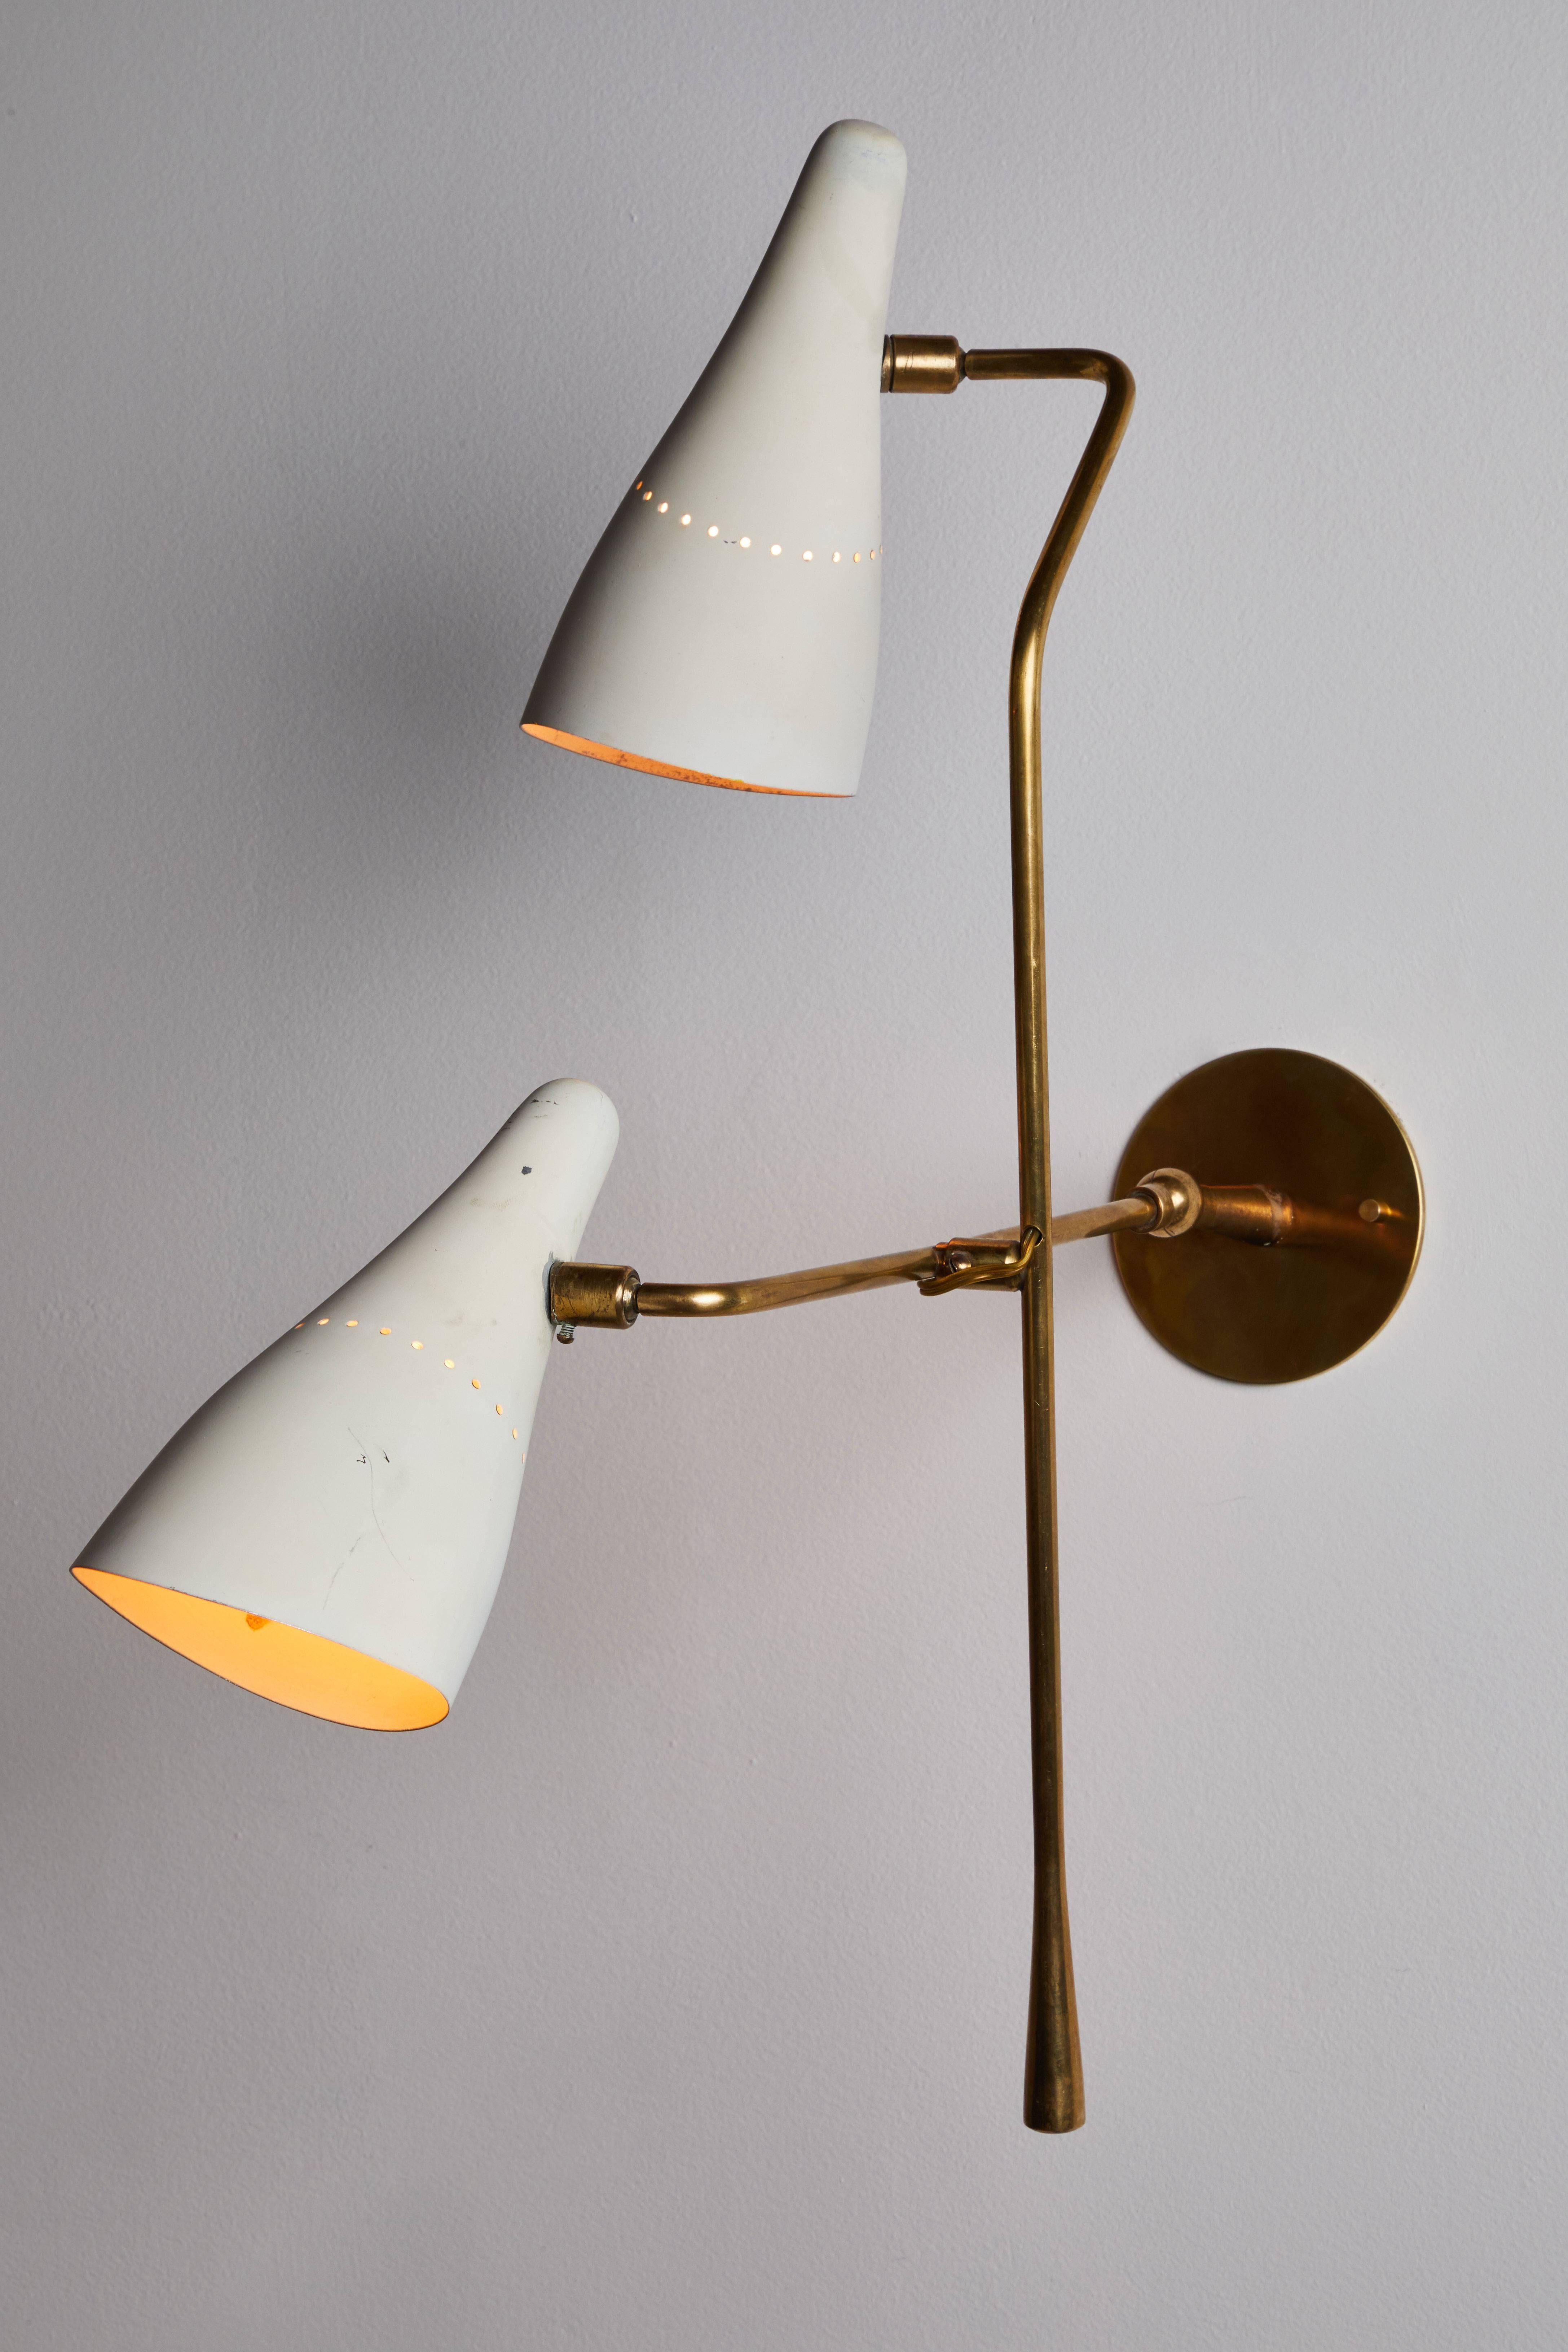 Rare double shade wall light by Lumen. Designed and manufactured in Italy, circa 1950s. Enameled metal and brass. Shades pivot up/down and left/right by ball joint. Height of fixture can be adjusted by brass lever. Rewired for US junction boxes.